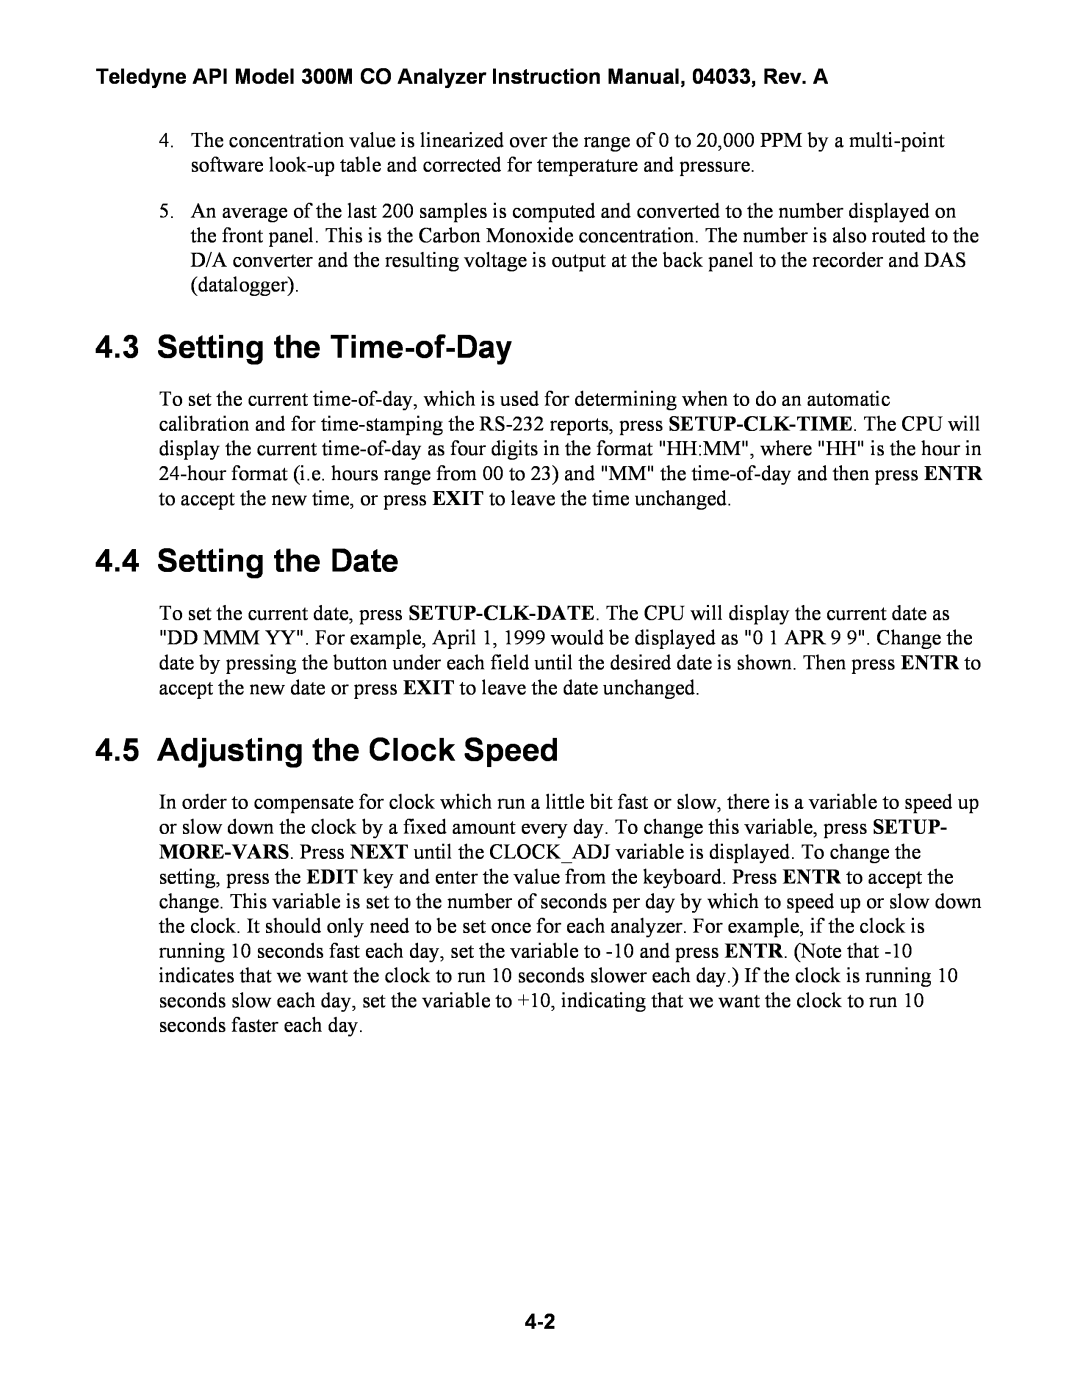 Teledyne 300M instruction manual 4.3Setting the Time-of-Day, Setting the Date, Adjusting the Clock Speed 